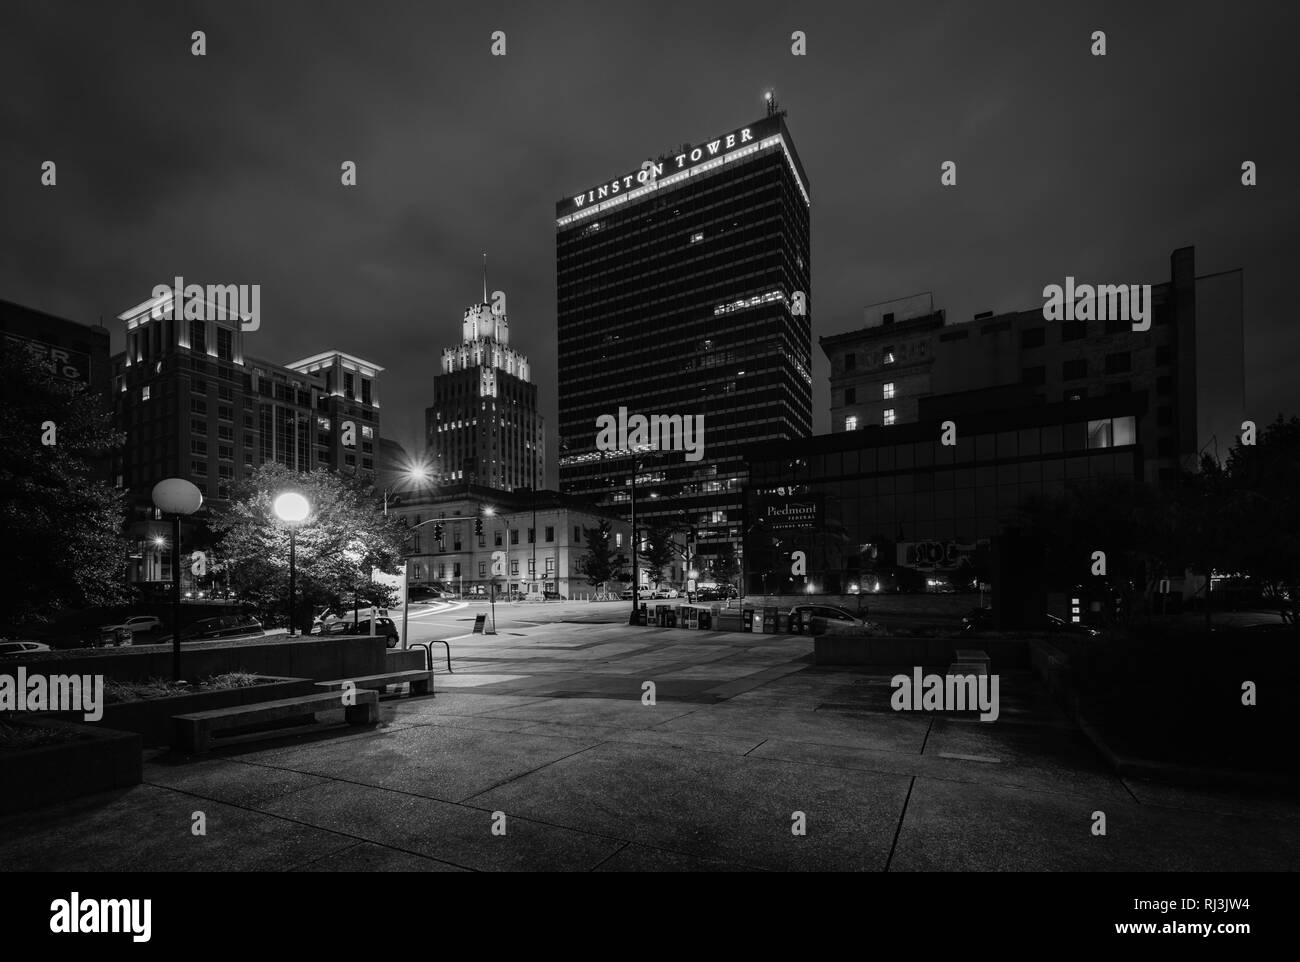 Buildings in downtown at night, in Winston-Salem, North Carolina. Stock Photo